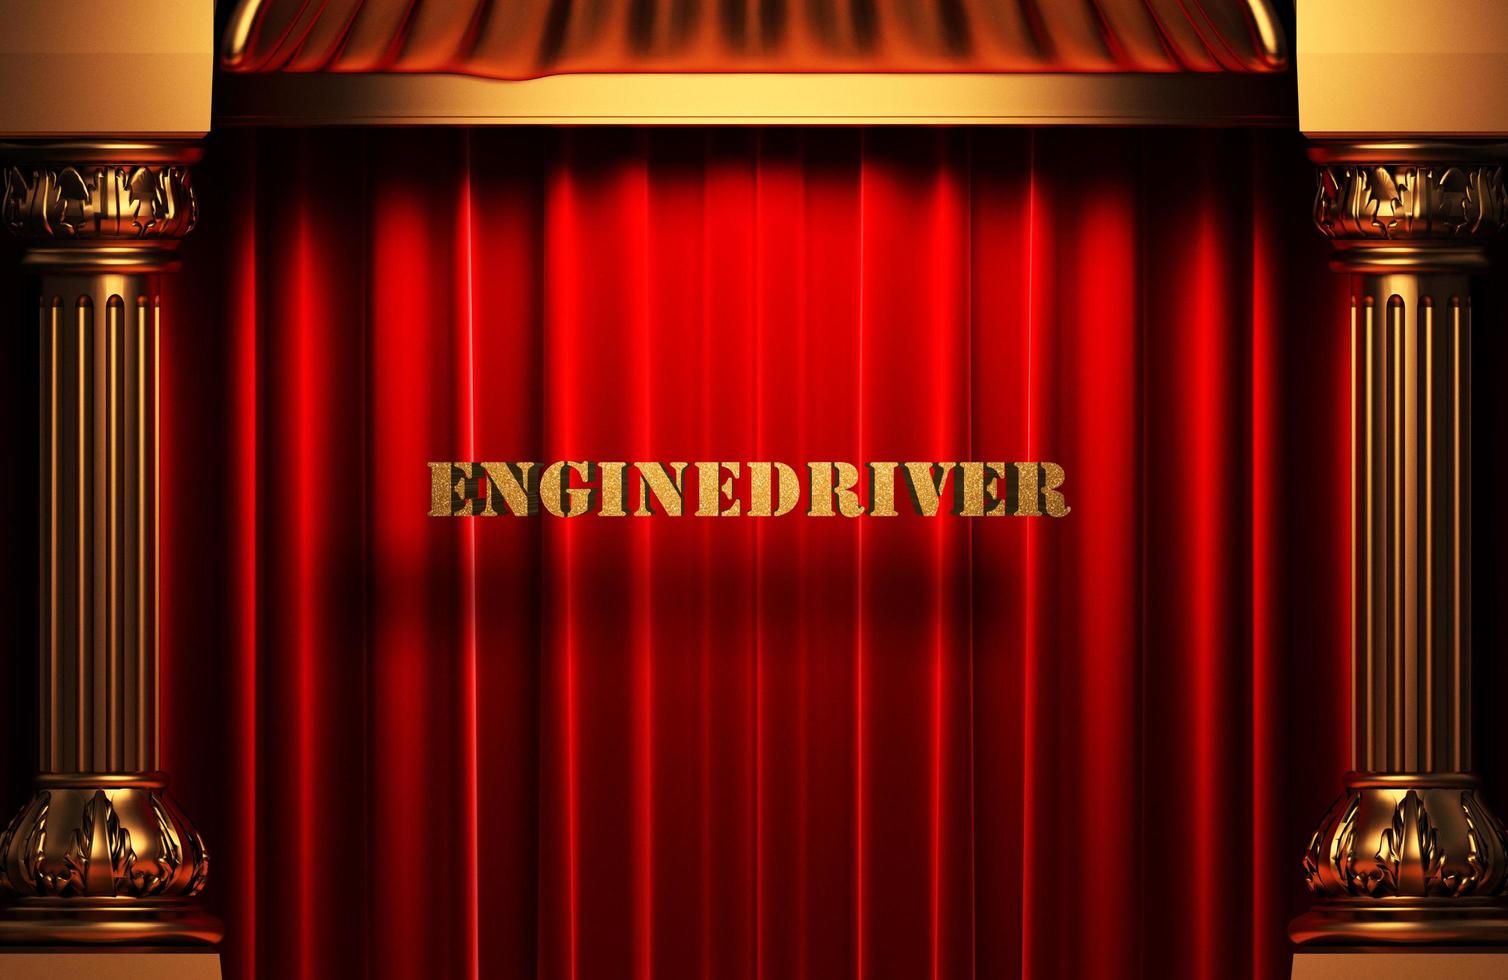 enginedriver golden word on red curtain photo